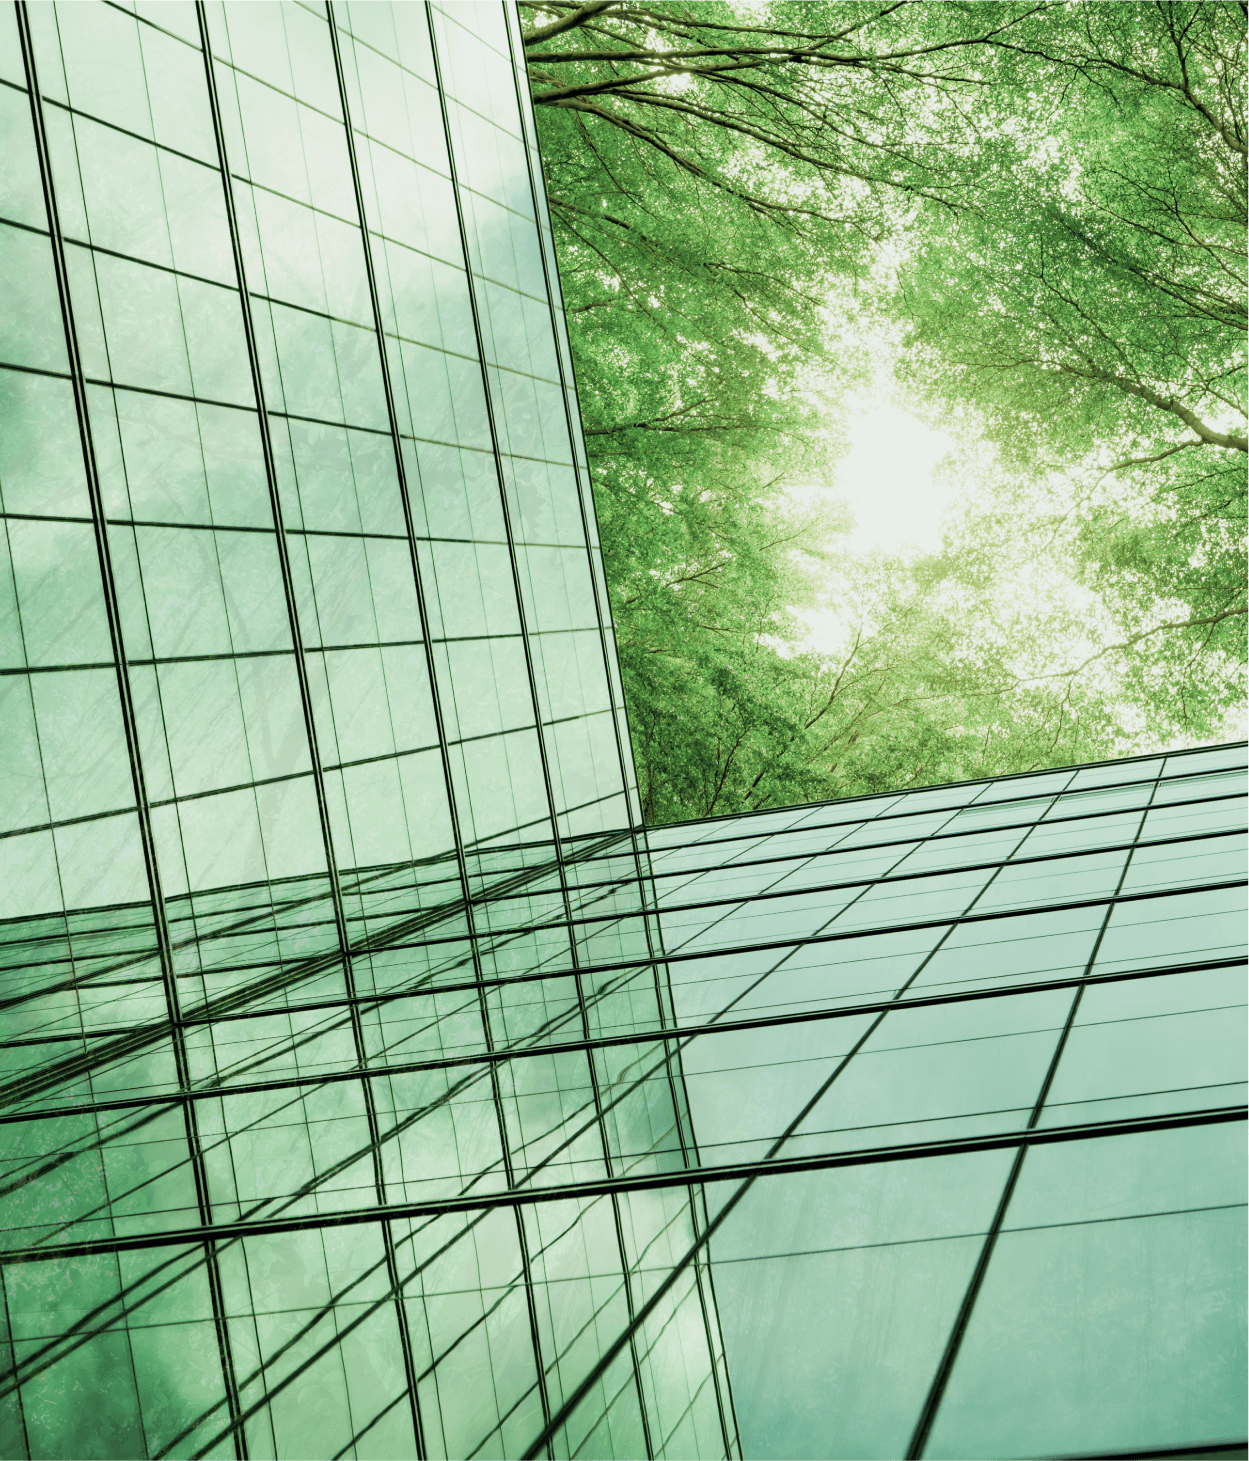 Eco-friendly building in the modern city. Green tree branches with leaves and sustainable glass building for reducing heat and carbon dioxide. Office building with green environment. Go green concept.